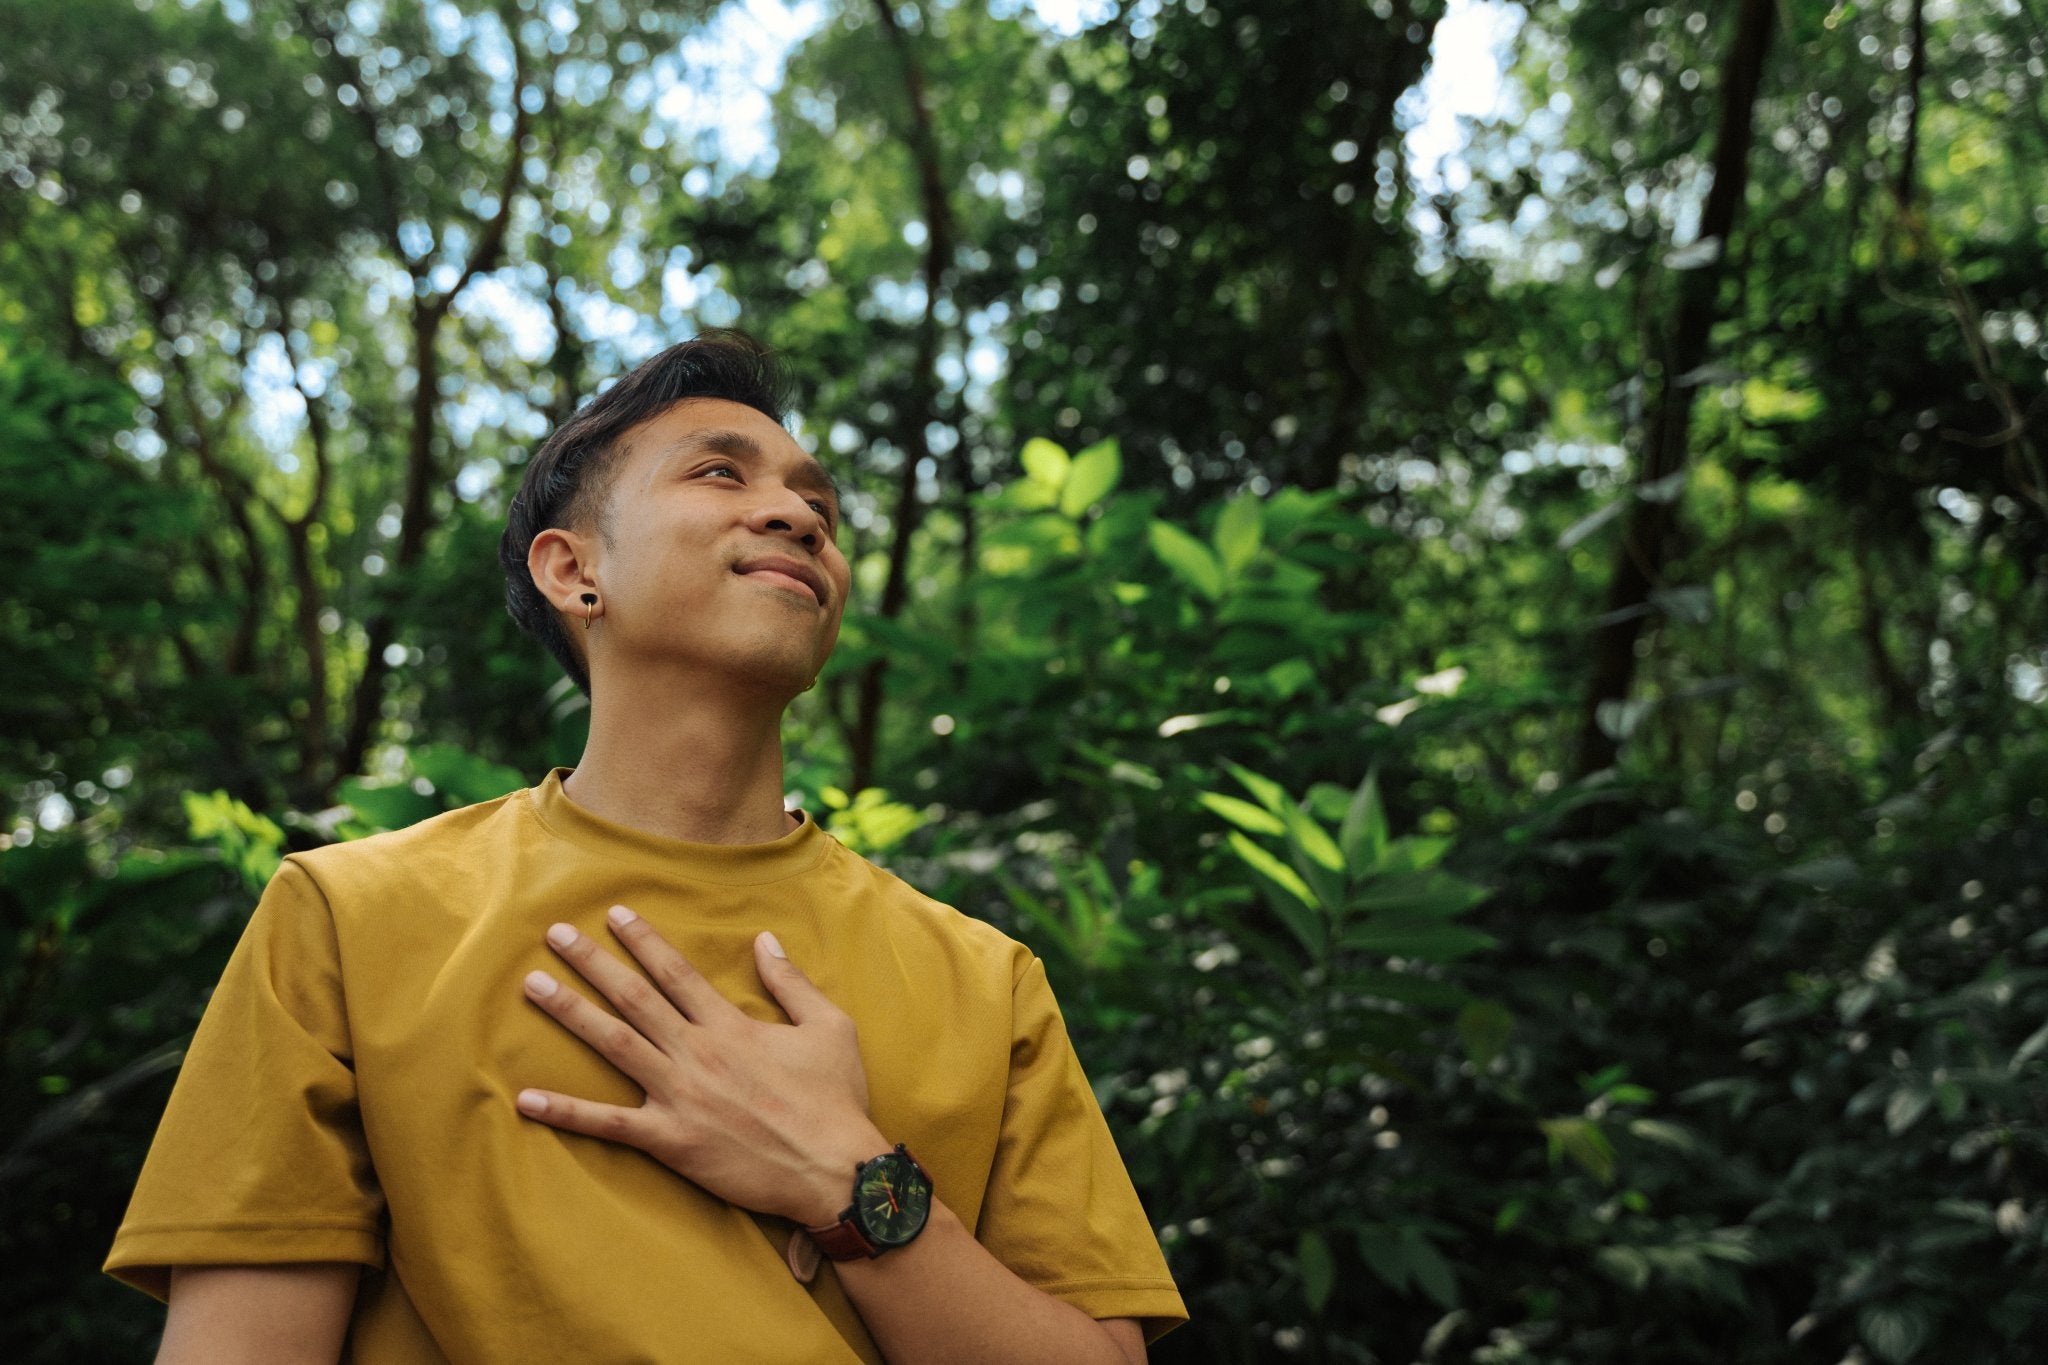 Bayu coach at Life Architekture, wearing yellow t-shirt, face looking up, hand on heart, in jungle background